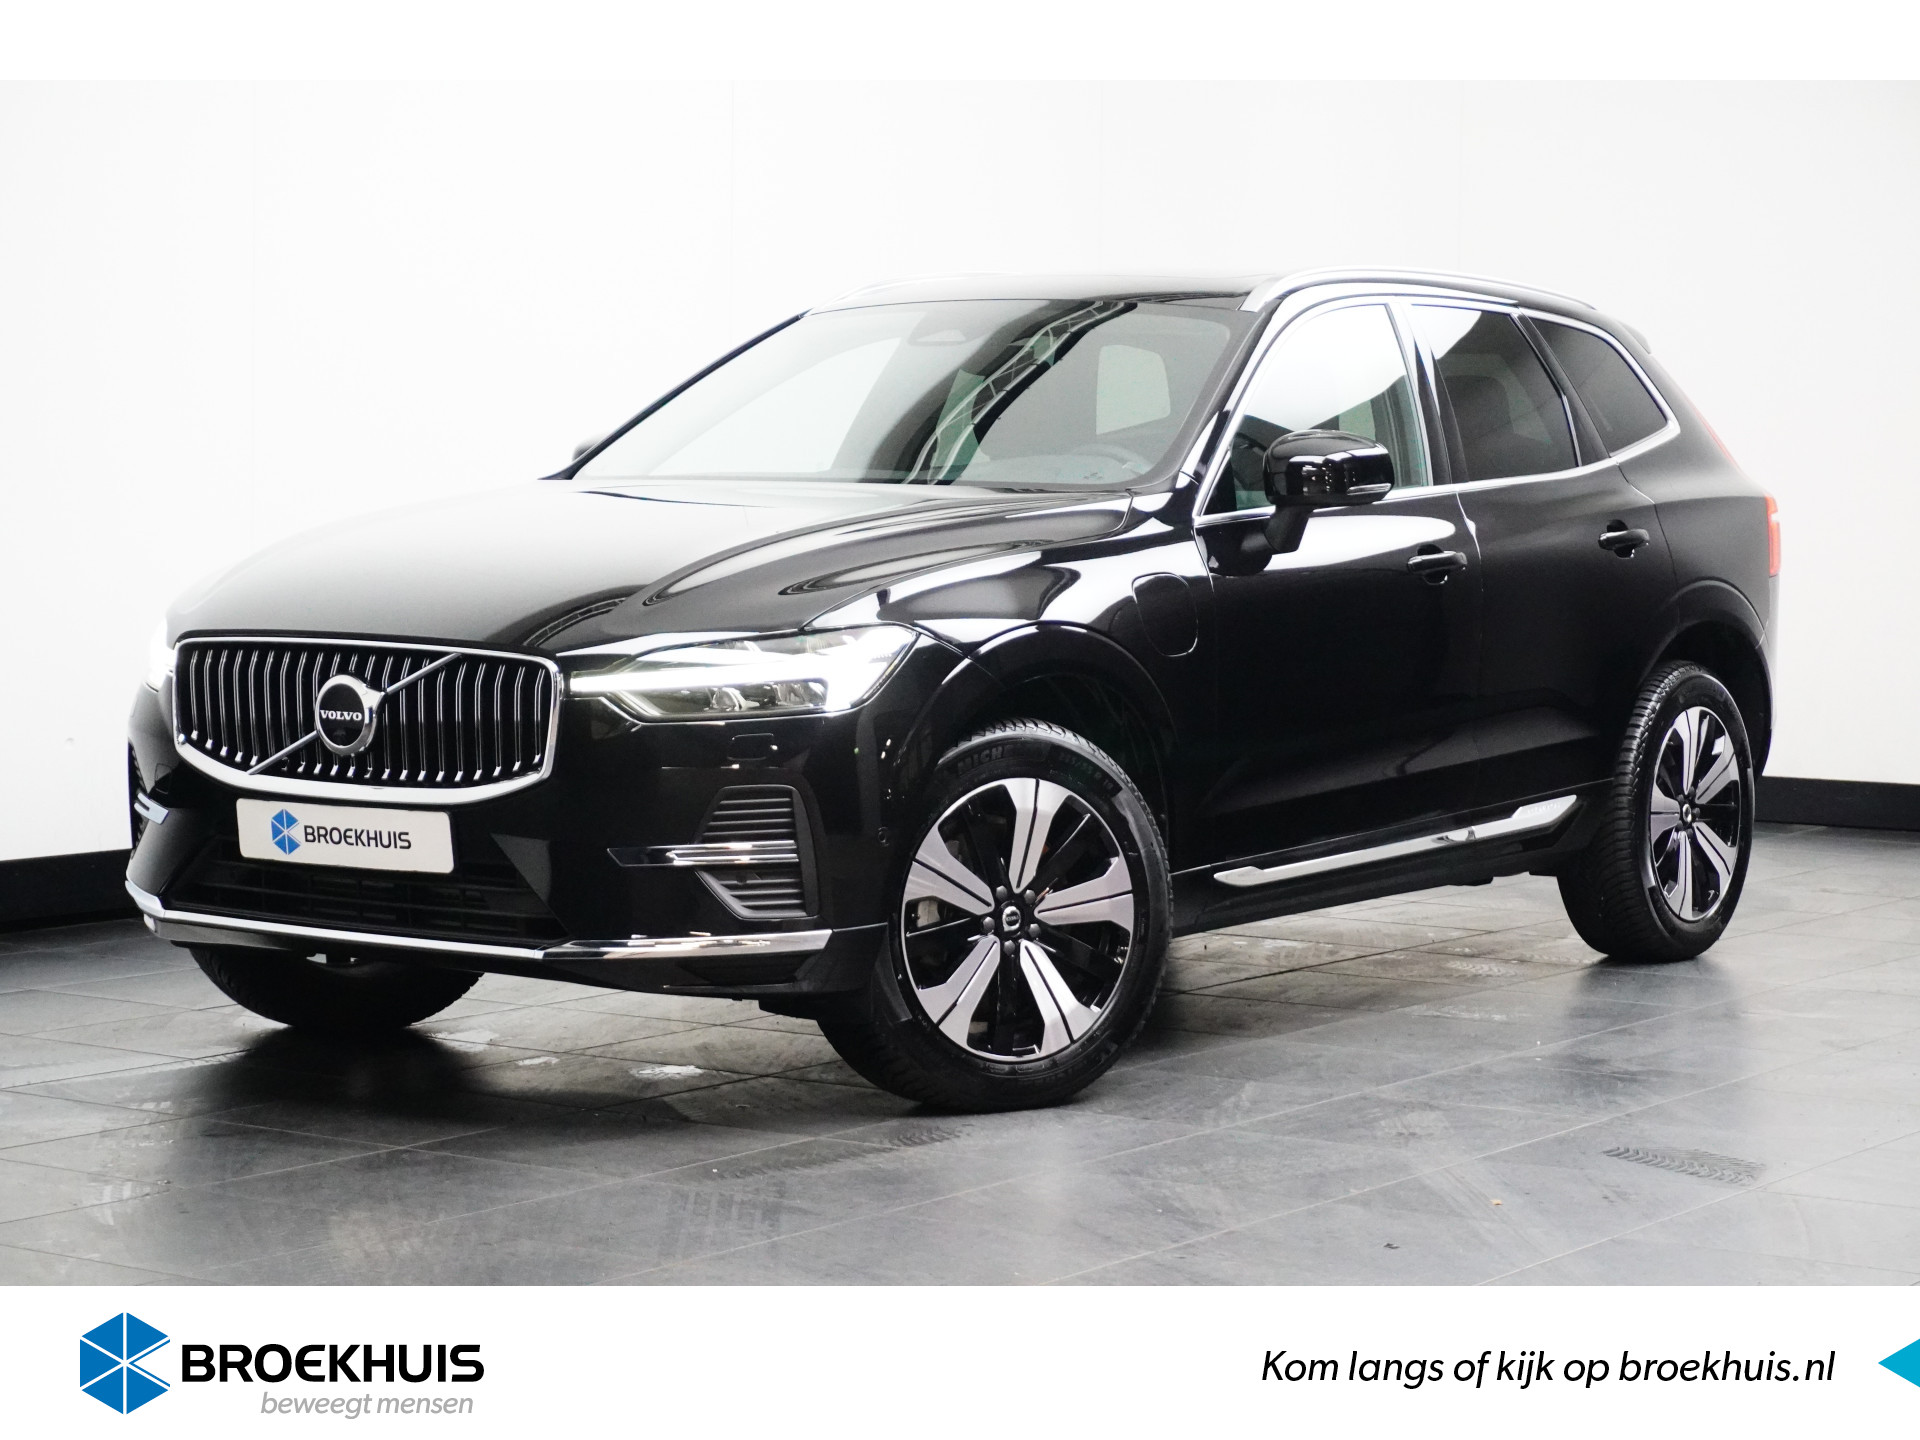 Volvo XC60 Recharge T6 AWD Plus Bright Long Range | Climate Pro Pack | Power Seats Pack | Park Assist Pack | 360o Camera | Parkeerverwarmin bij viaBOVAG.nl